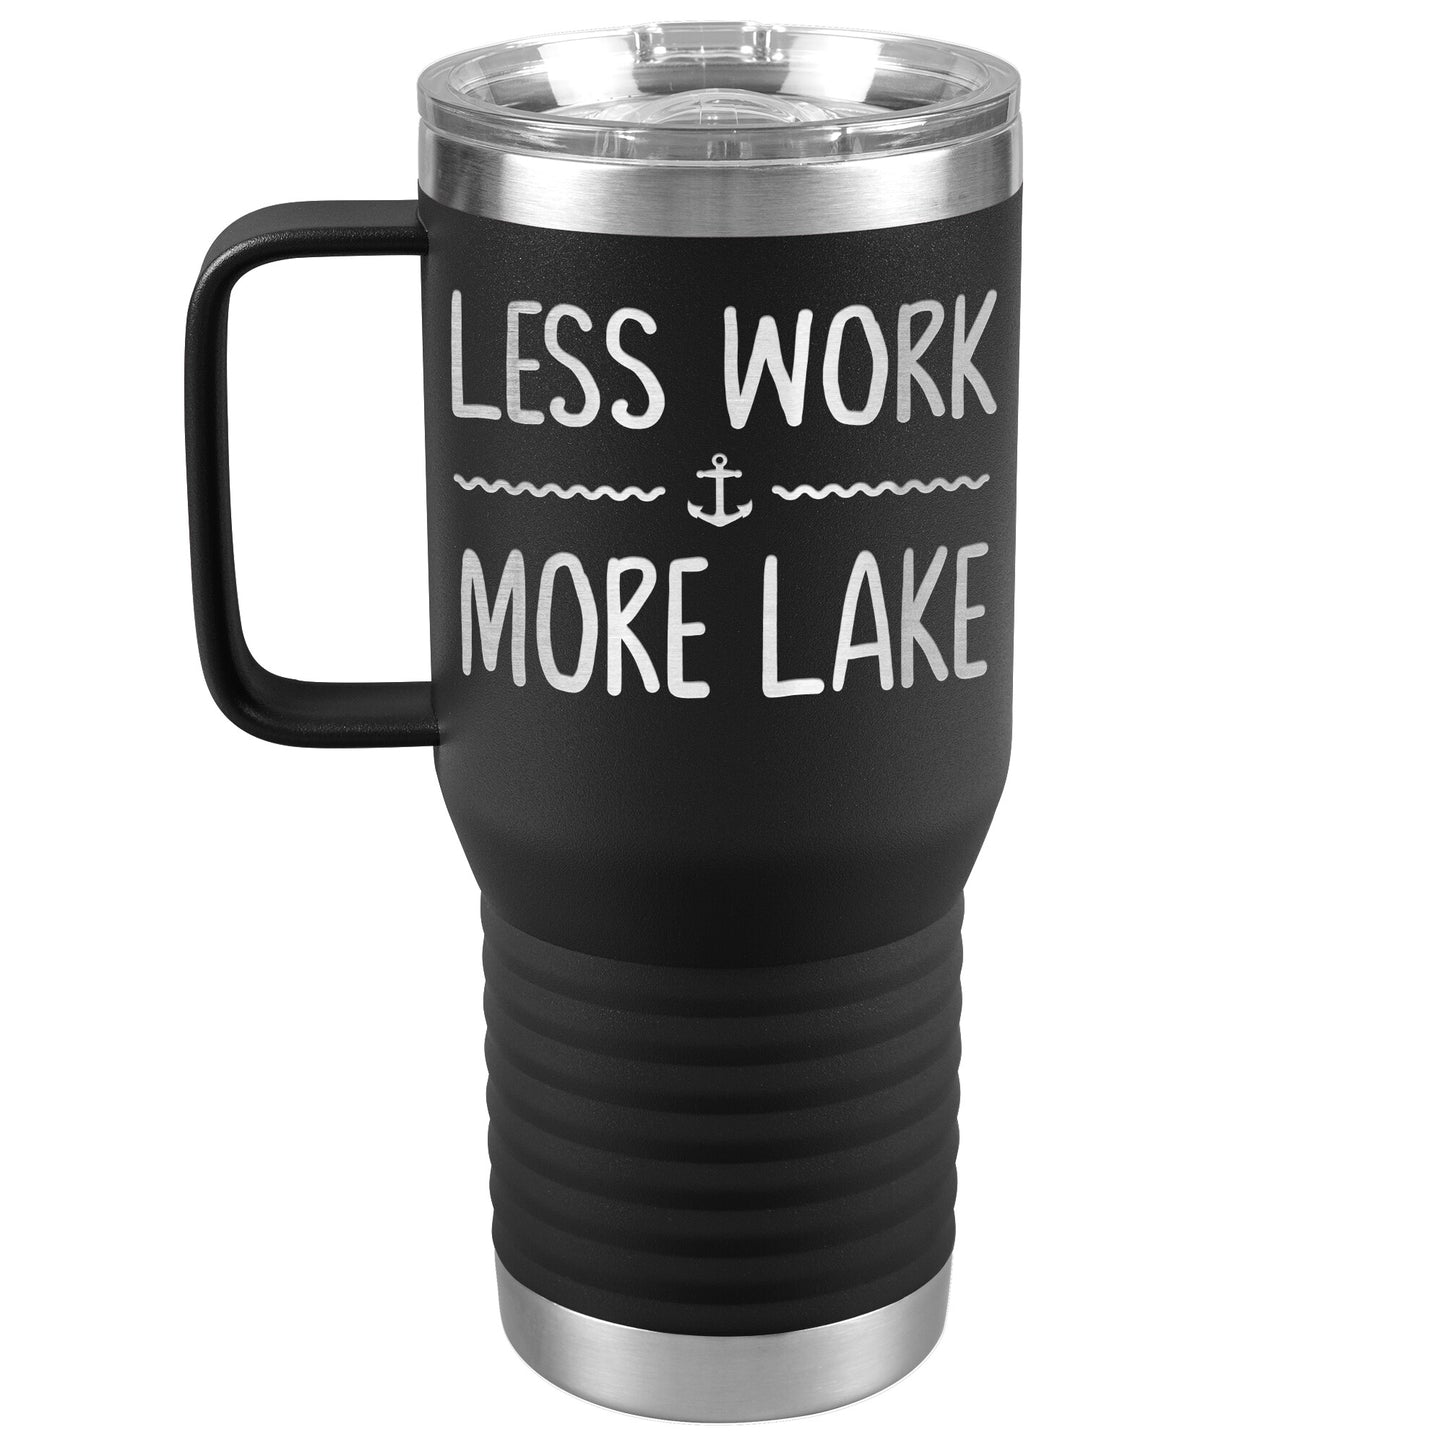 Less Work More Lake Drink Tumbler - Funny Insulated Cup